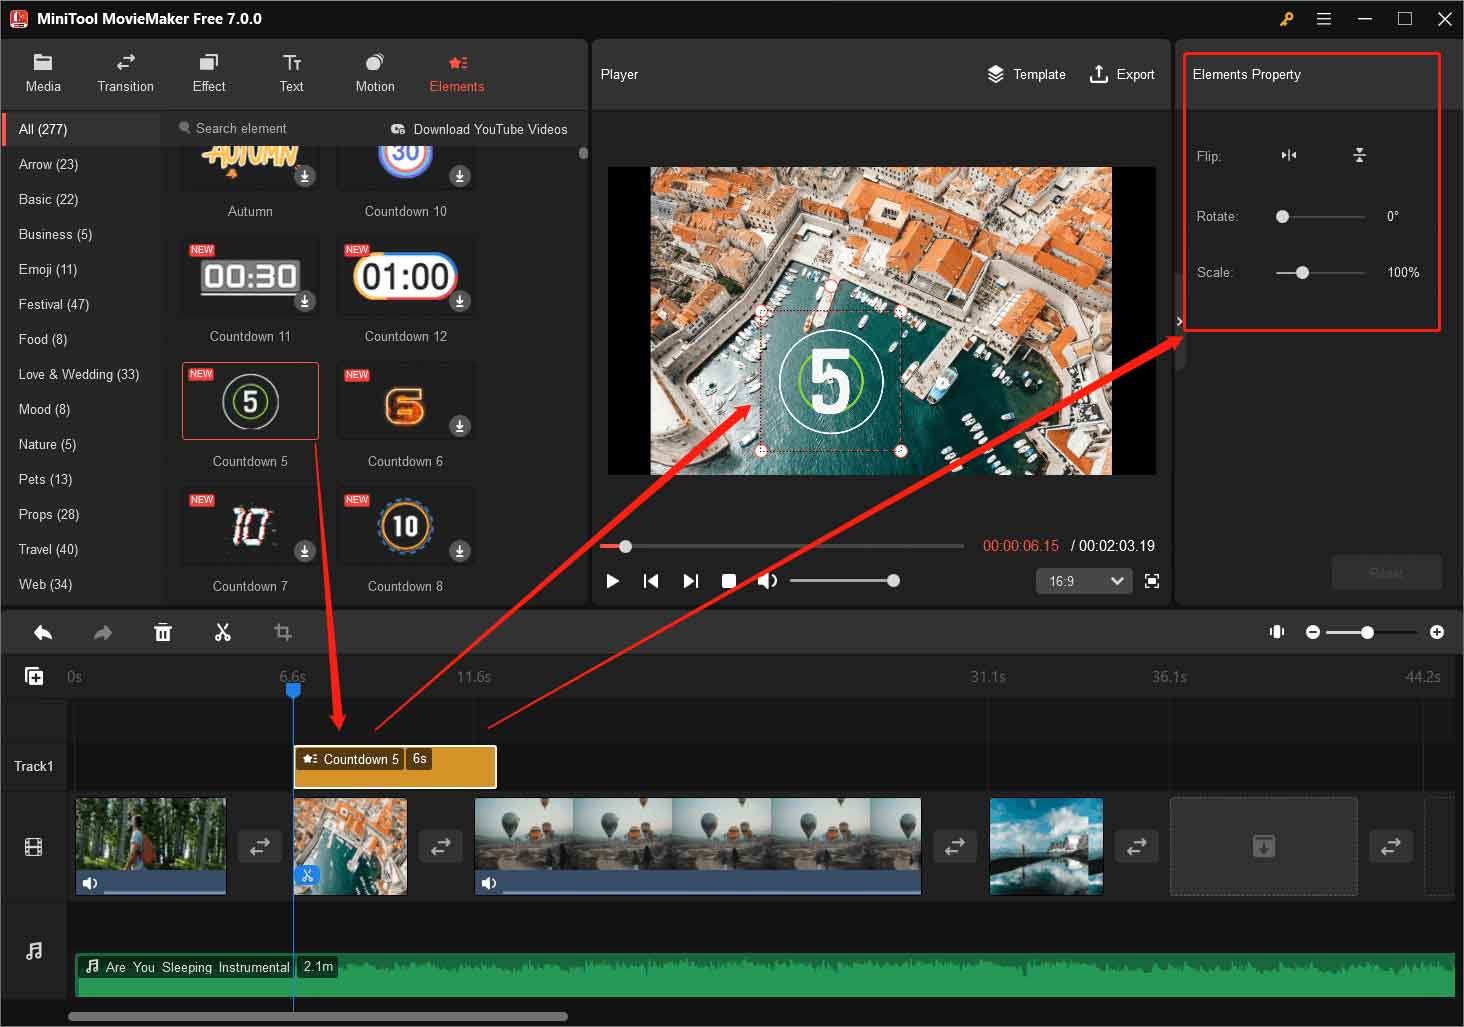 add a sticker to a photo in MiniTool MovieMaker